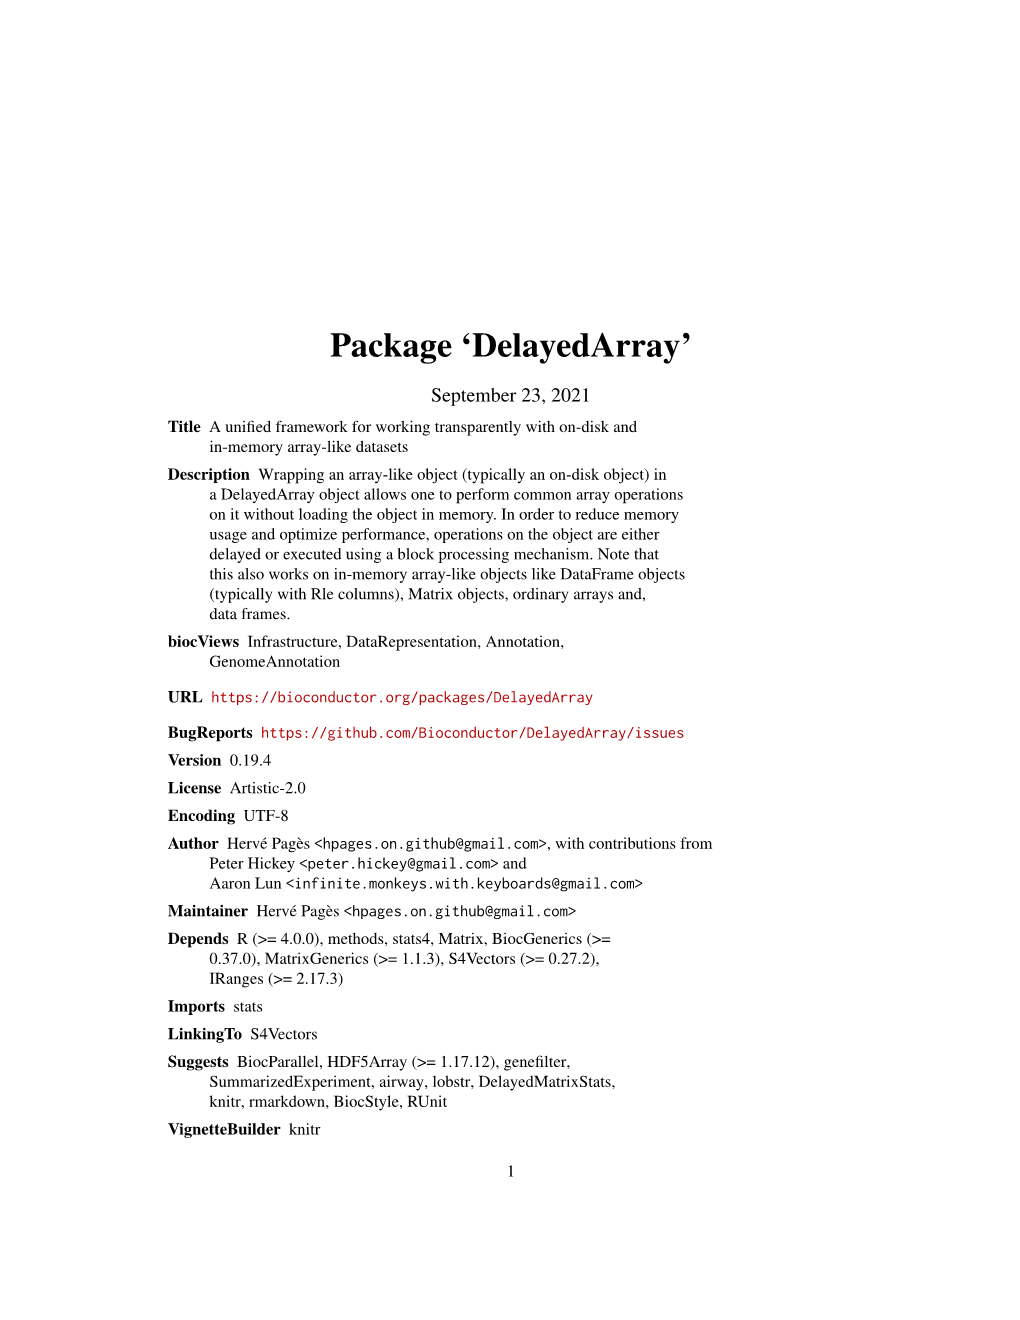 Delayedarray: a Unified Framework for Working